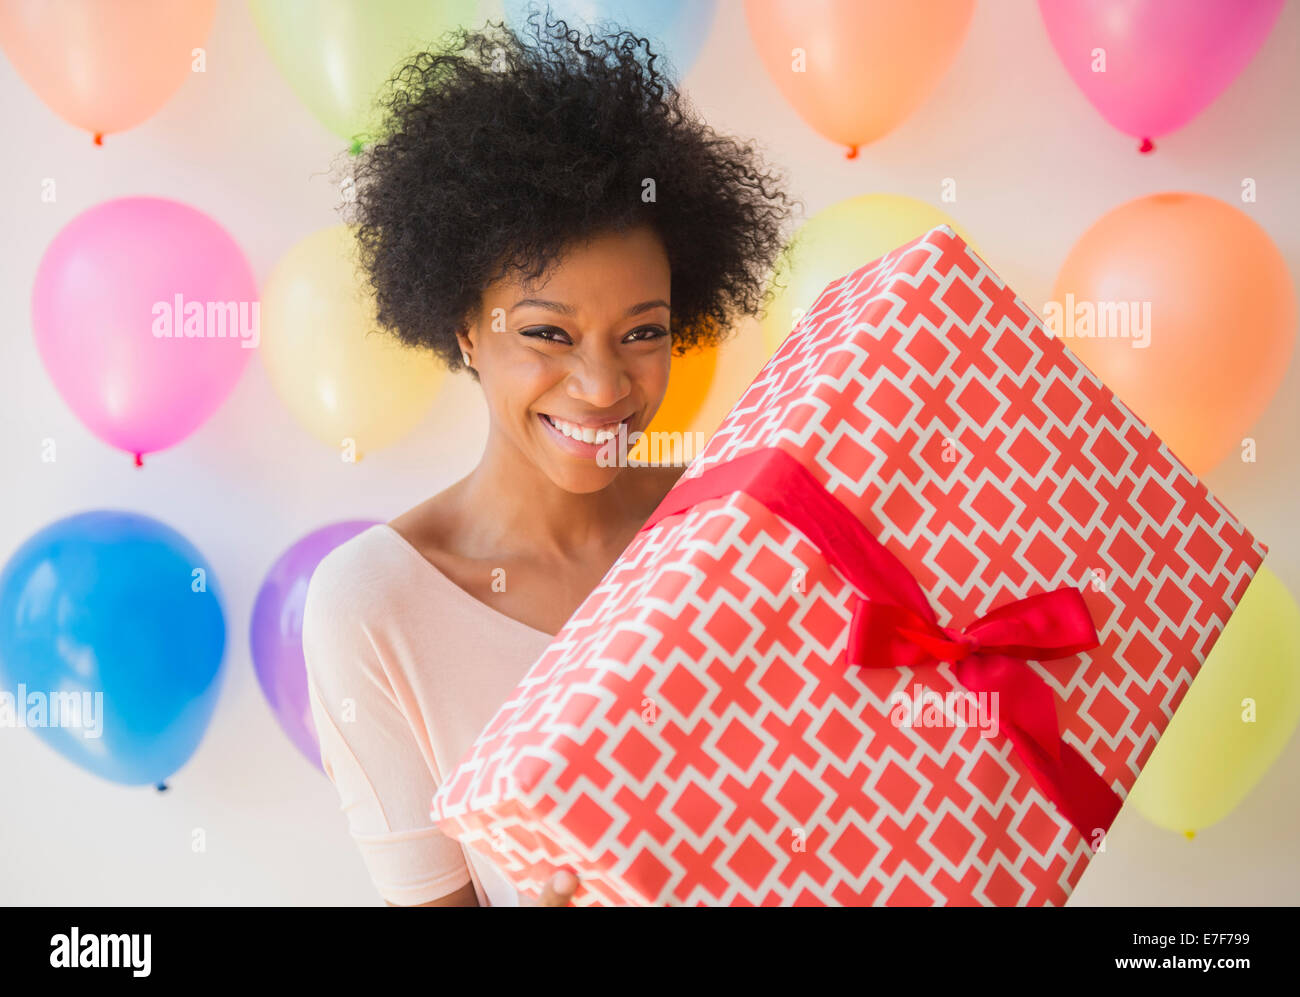 African American woman holding wrapped gift at birthday party Stock Photo